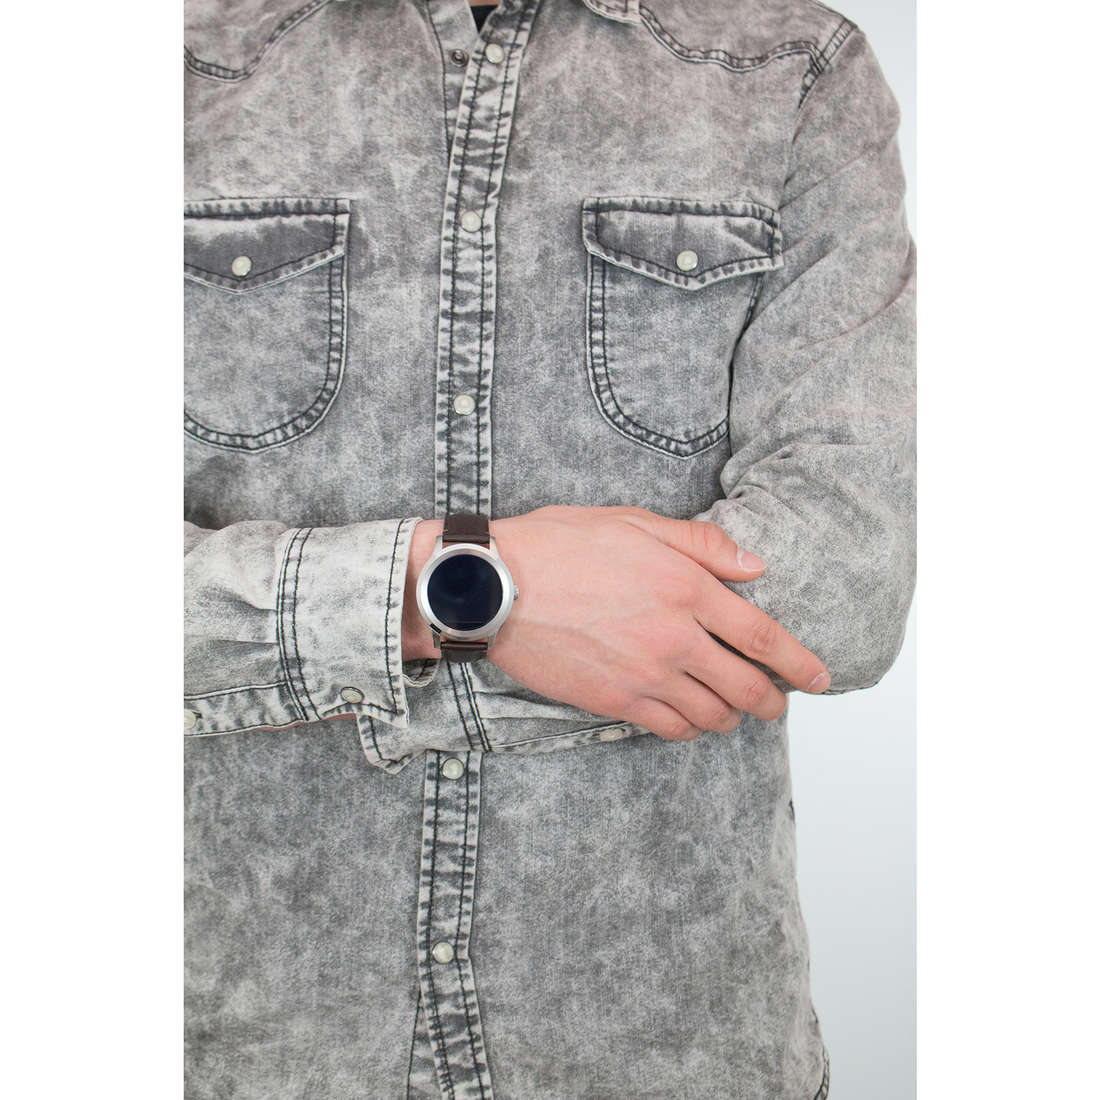 Fossil Smartwatches Q Founder homme FTW2119 Je porte